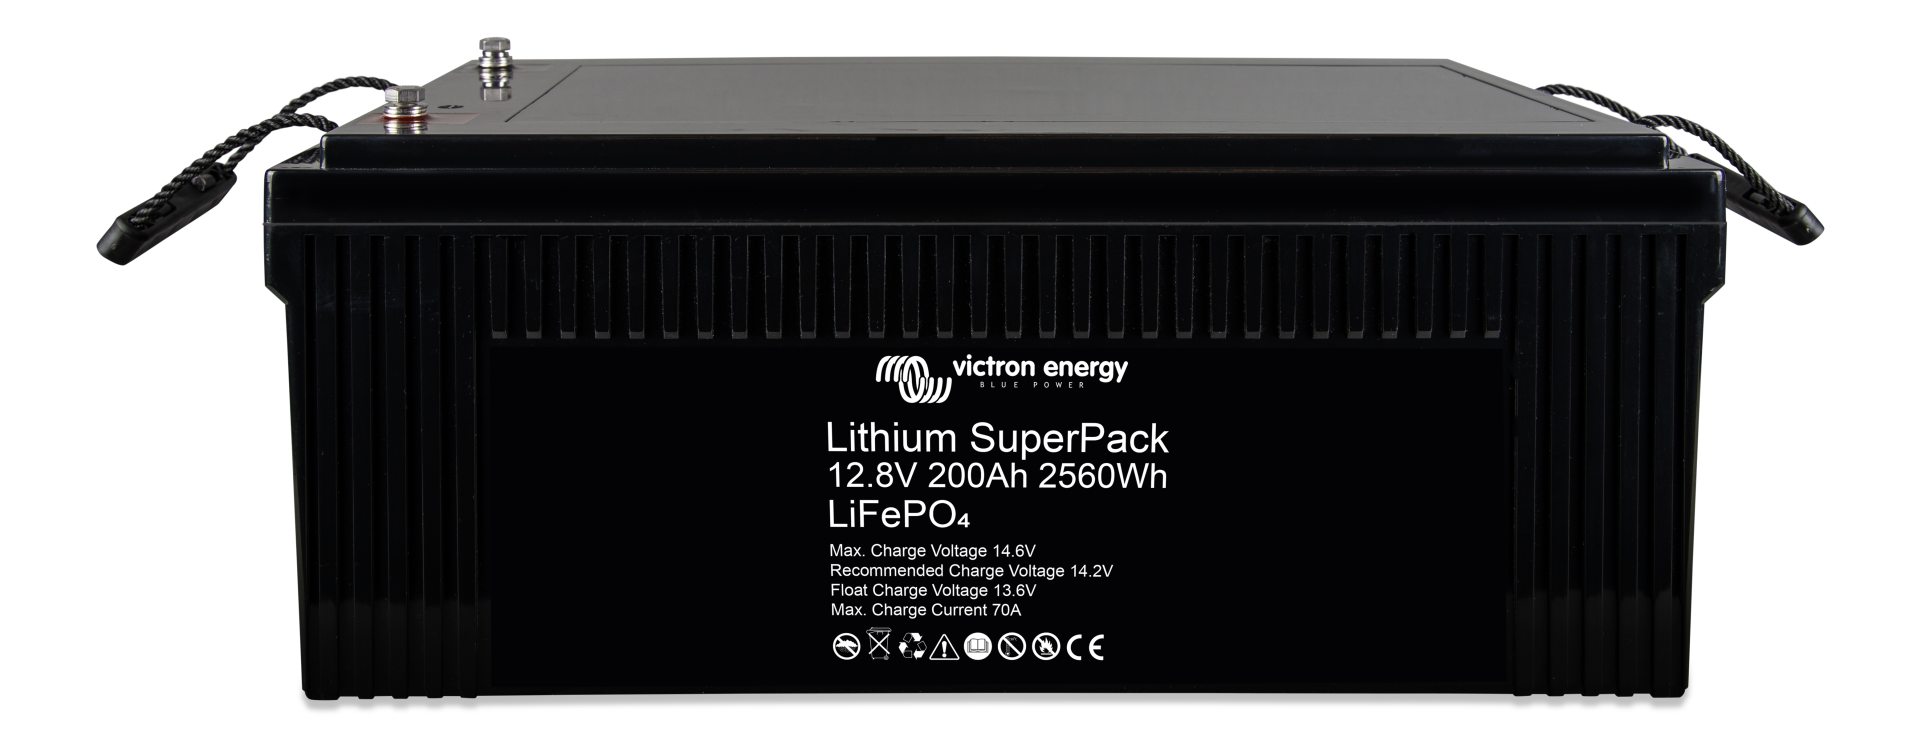 Lithium SuperPack batteries - an all in one solution - Victron Energy